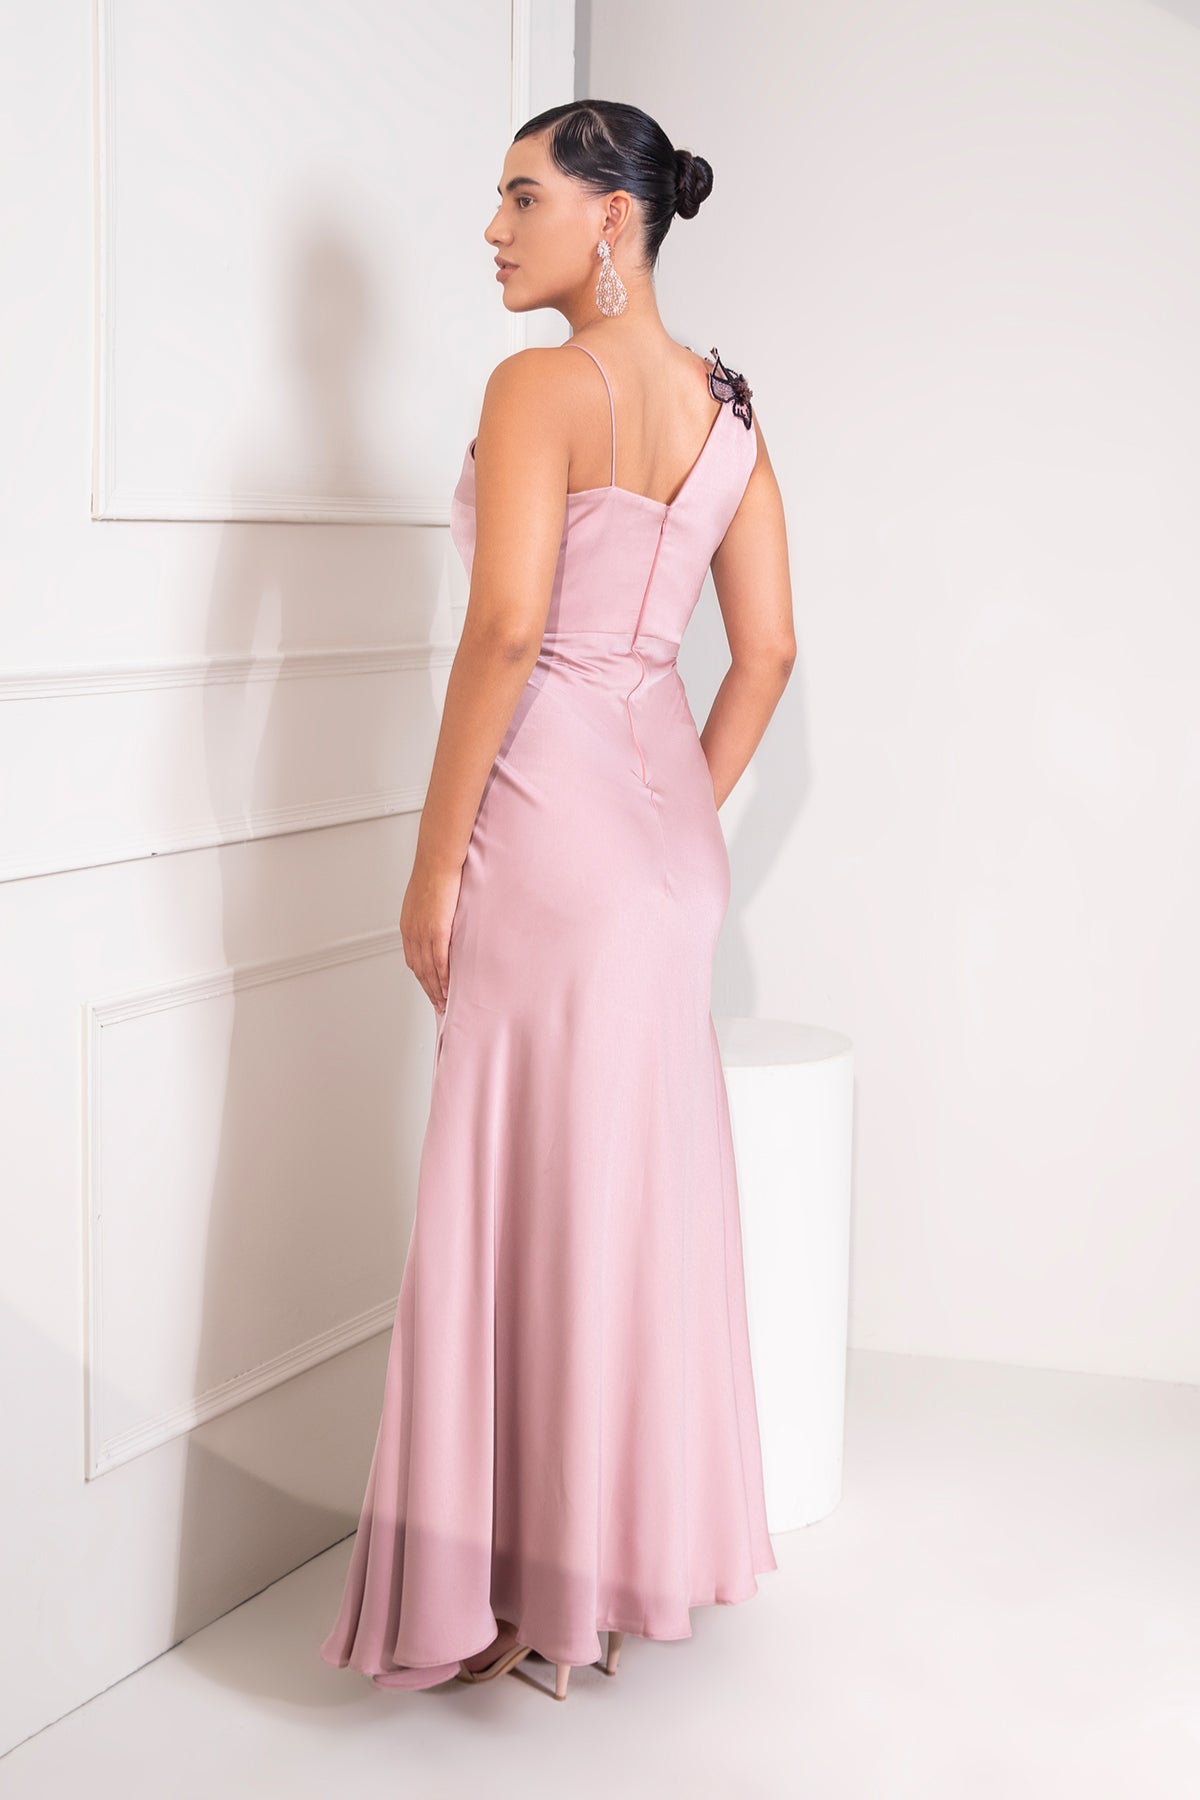 Dusty Rose fish-cut gown with 3D flower work